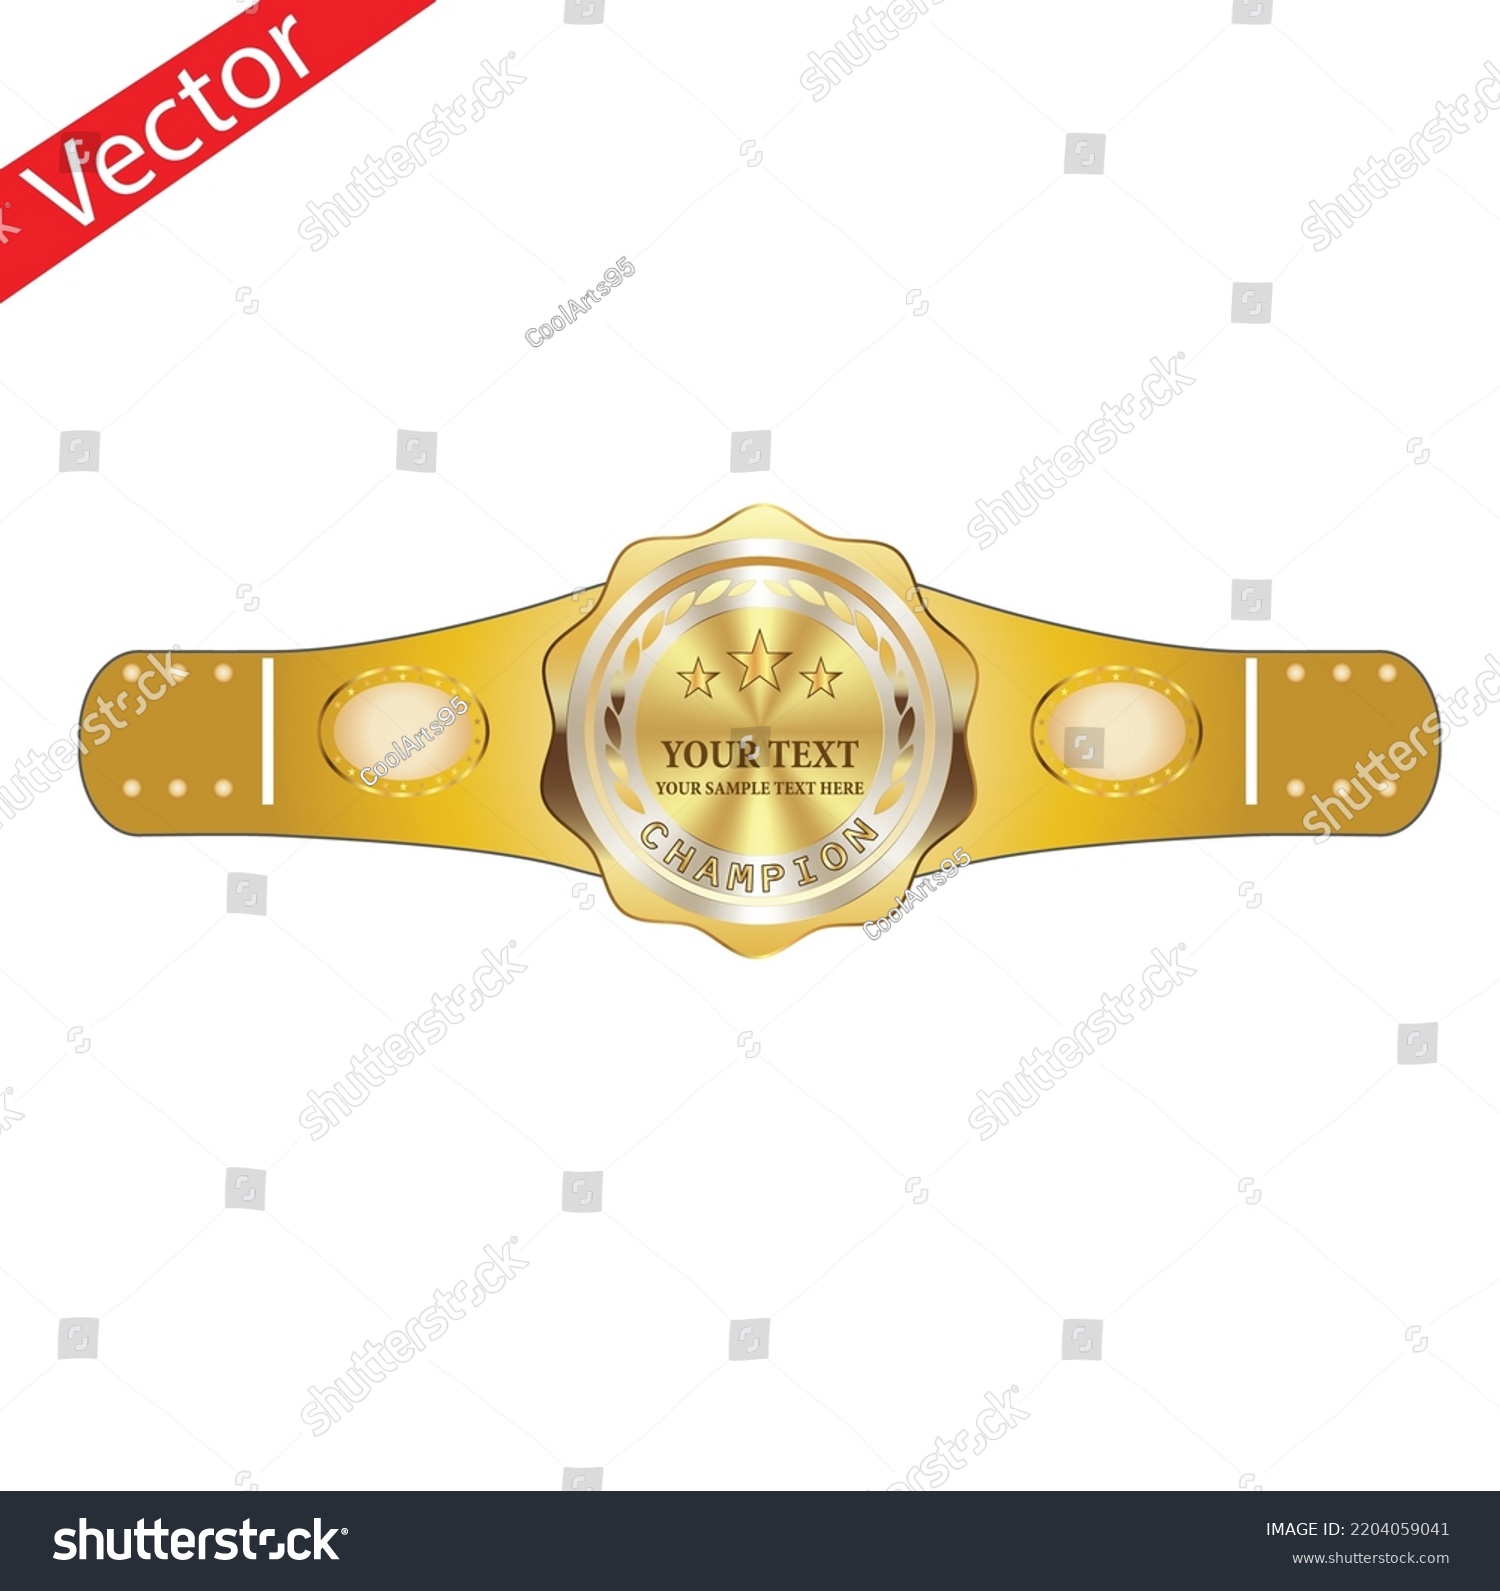 SVG of Vector mixed martial arts title champion belt isolated on white background. Trophy award for boxing, kickboxing or wrestling championship competition and tournament. Professional sport prize reward svg